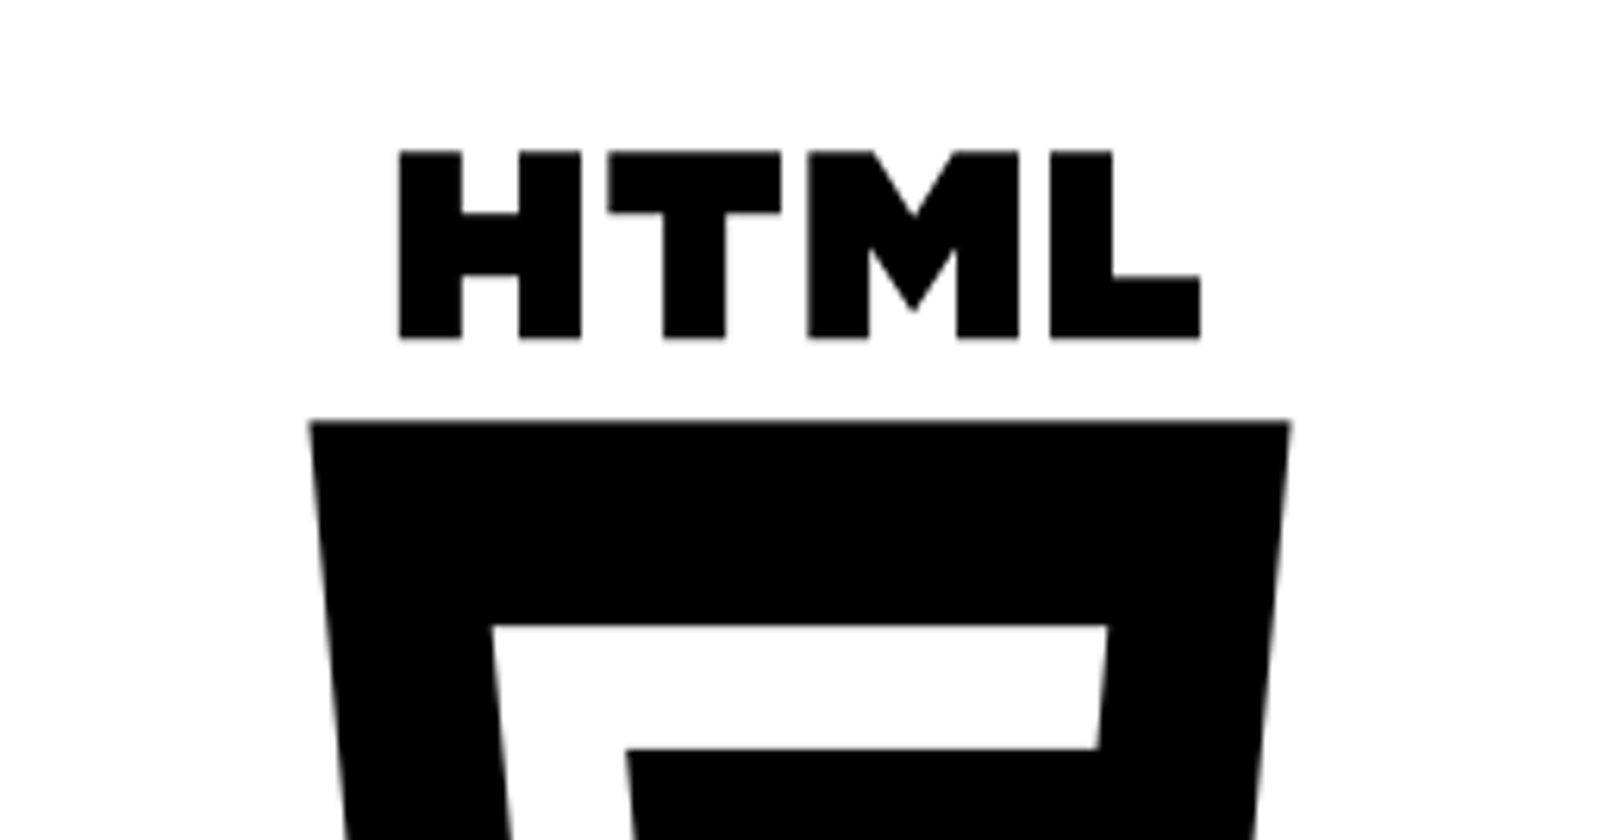 HTML5: New Features